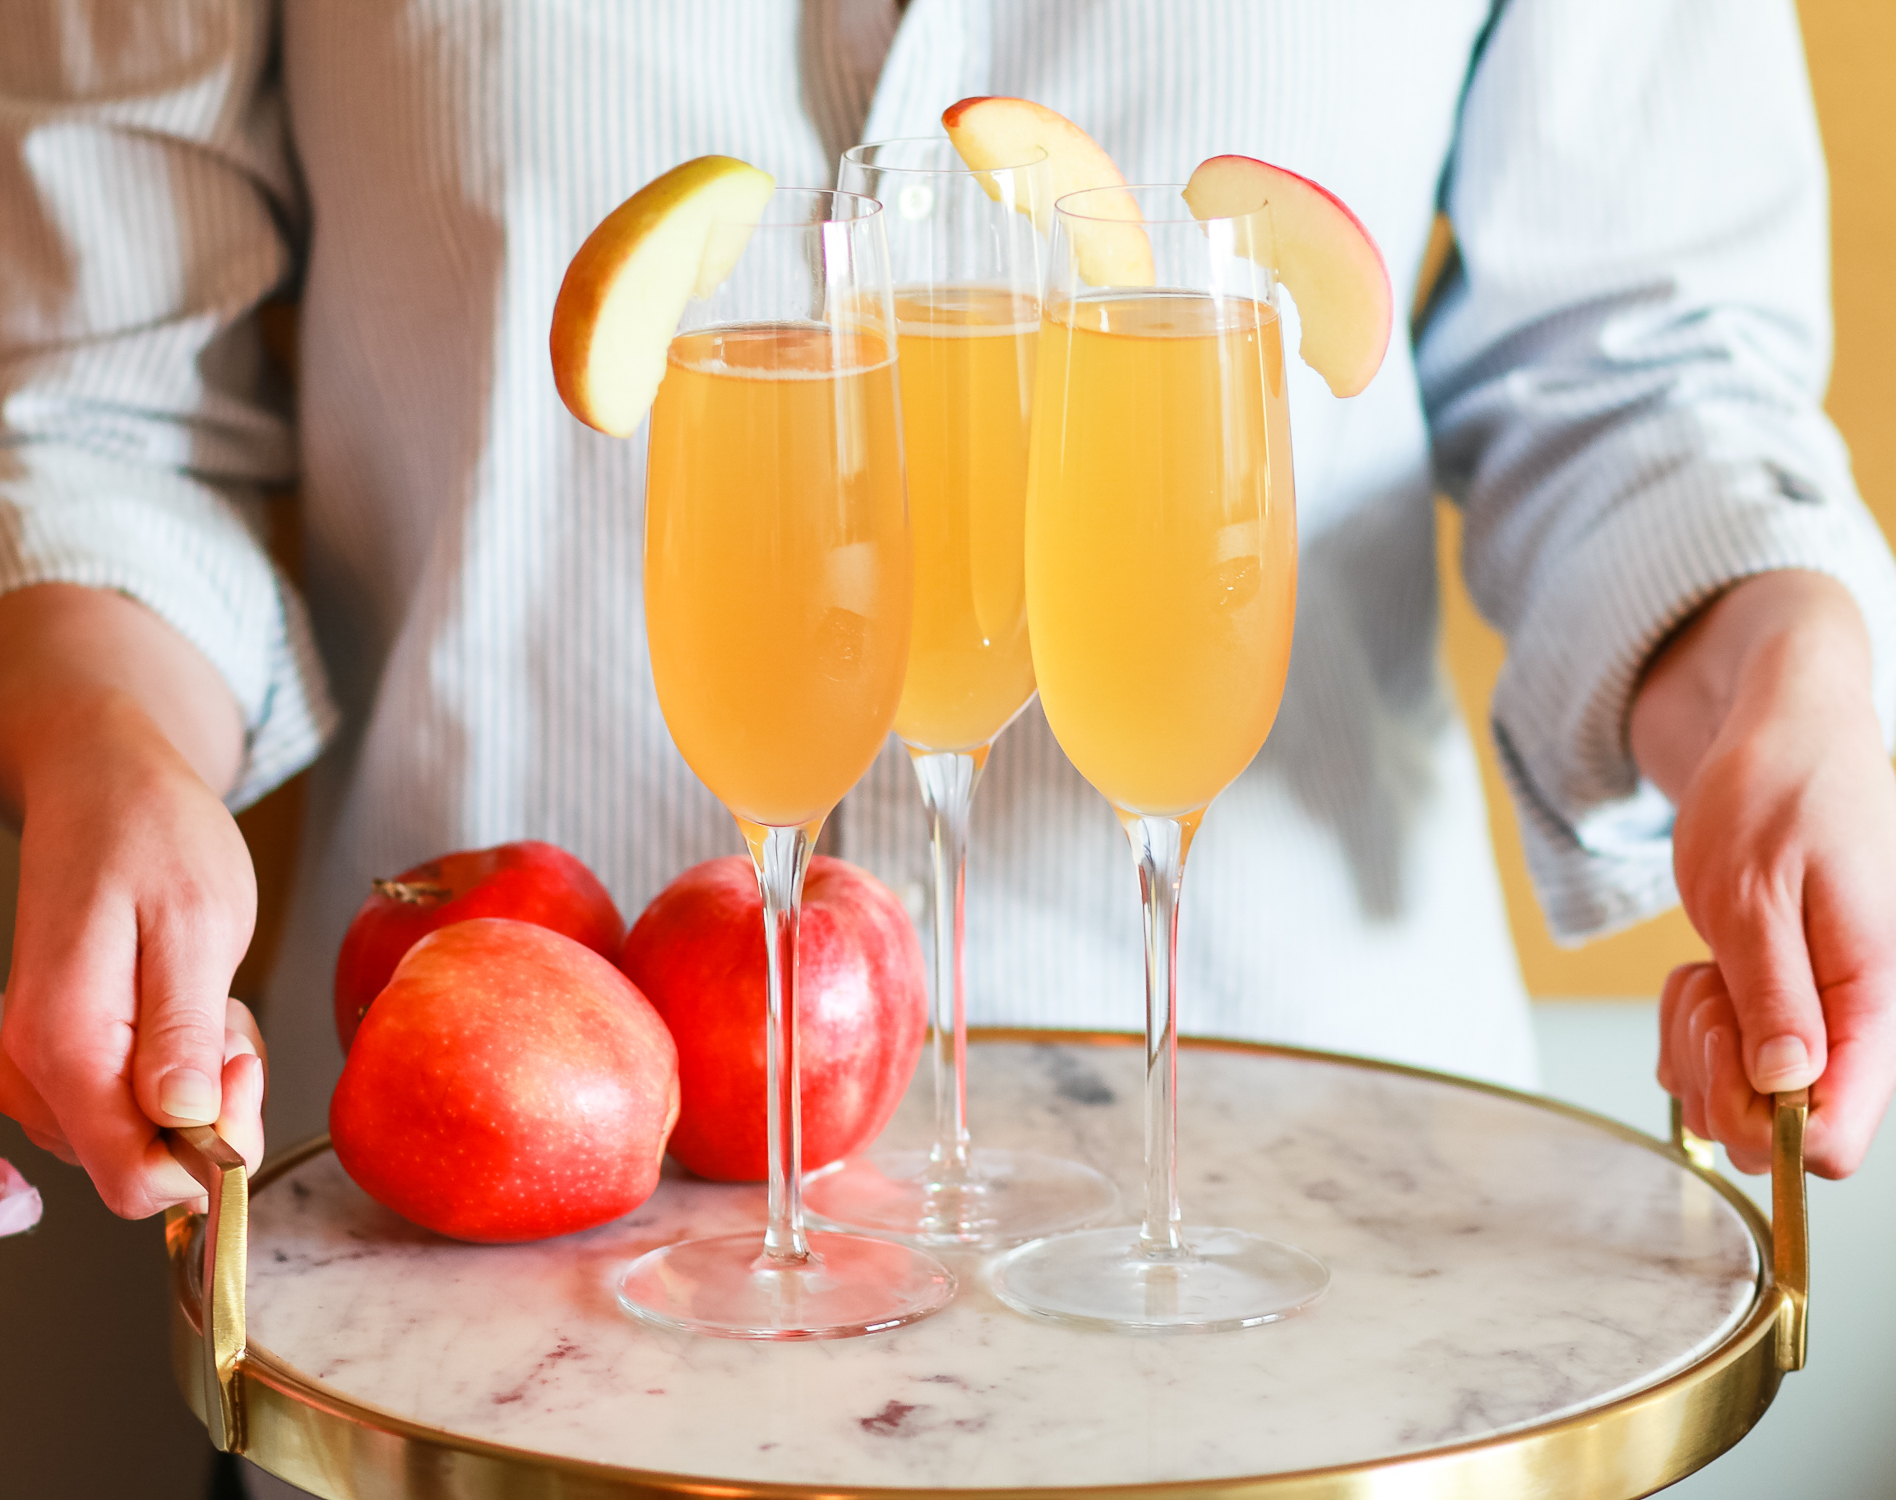 Seriously delish apple cider bellinis... such a fun fall champagne cocktail | Apple Cider Cocktail | Fall in a Flute: Festive Apple Cider Bellinis from southern blogger Stephanie Ziajka from Diary of a Debutante